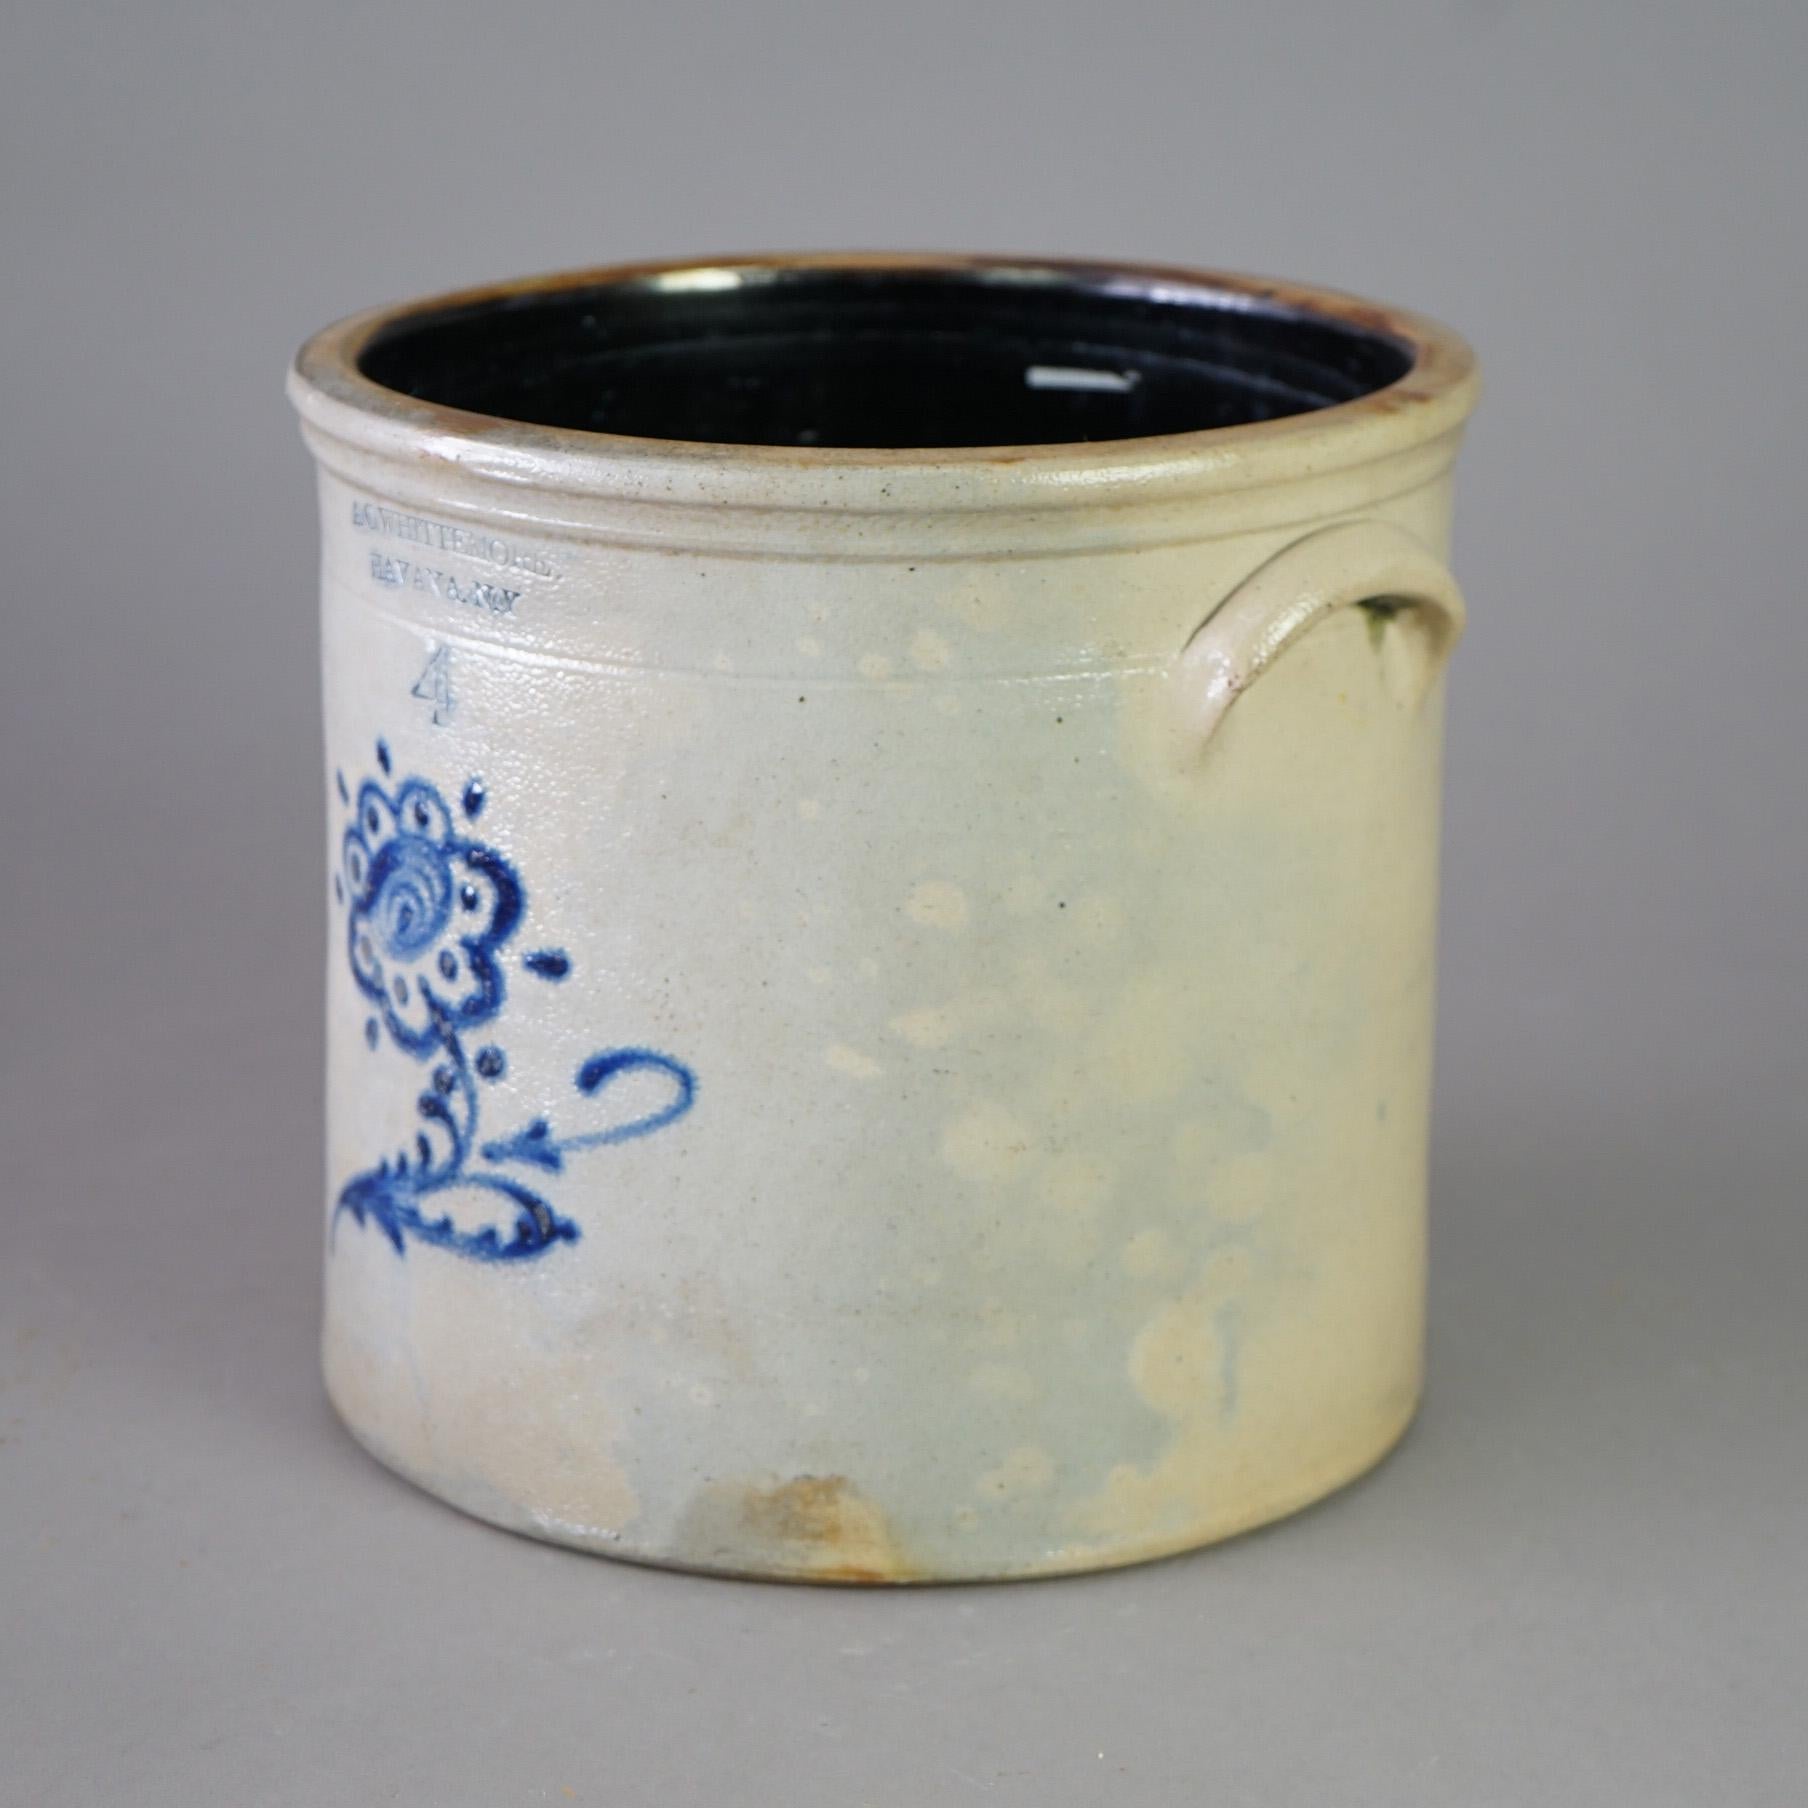 An antique Whittenmore salt glazed stoneware crock offers blue floral decoration, double handles and maker stamp as photographed, c1890

Measures- 10.75''H x 12''W x 12''D
